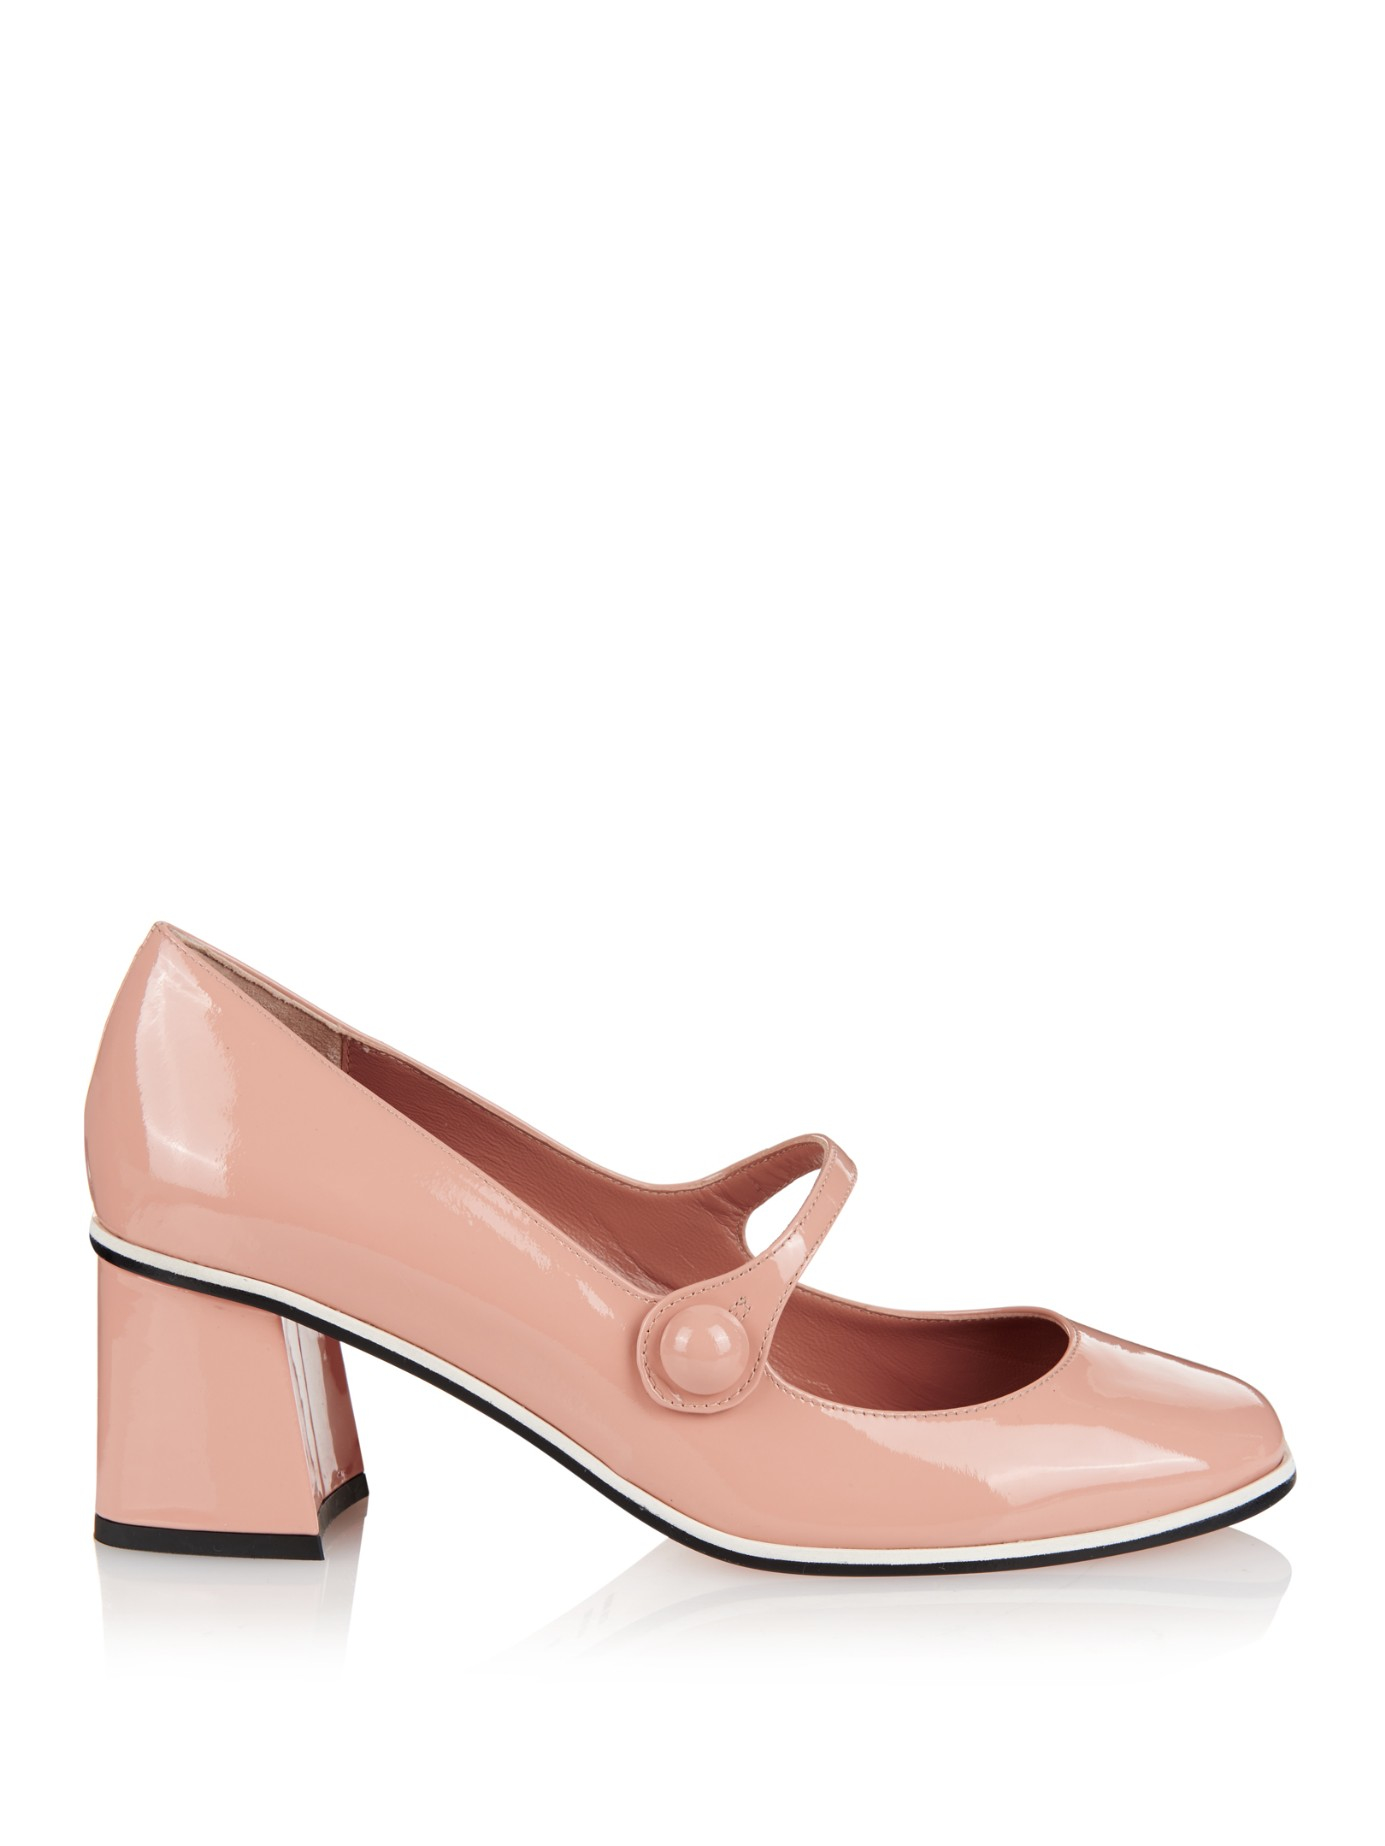 RED Valentino Patent-Leather Mary-Jane 